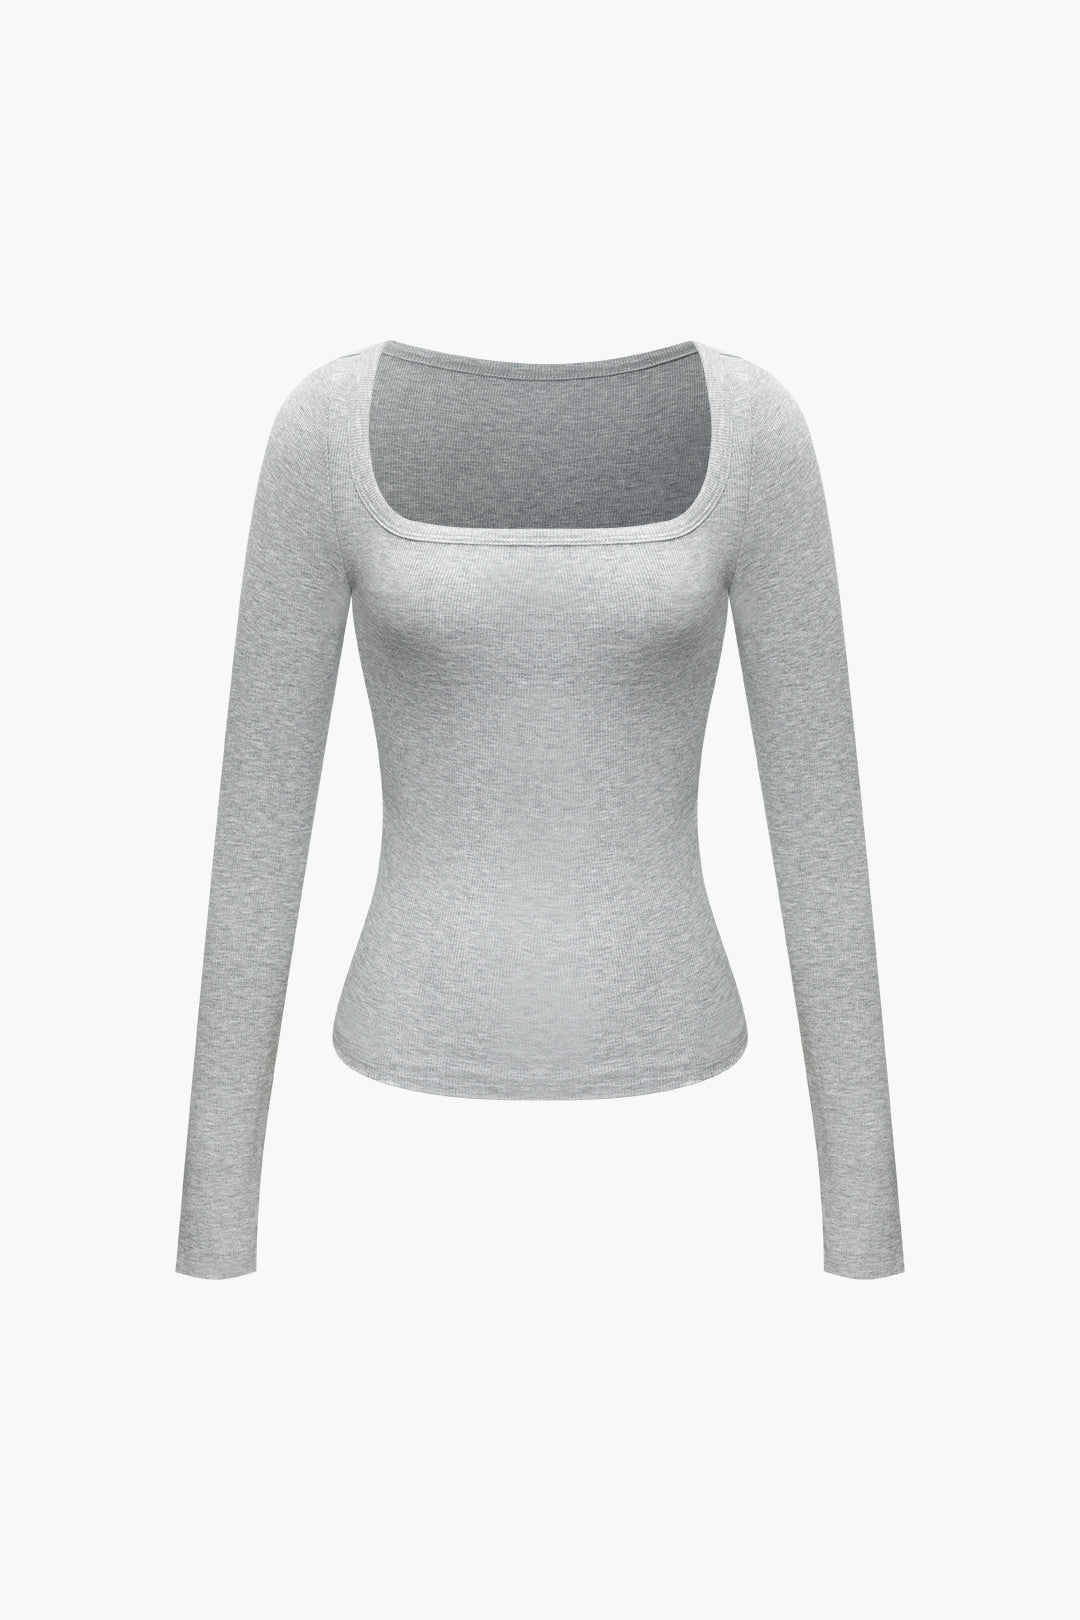 Basic Square Neck Long Sleeve Top